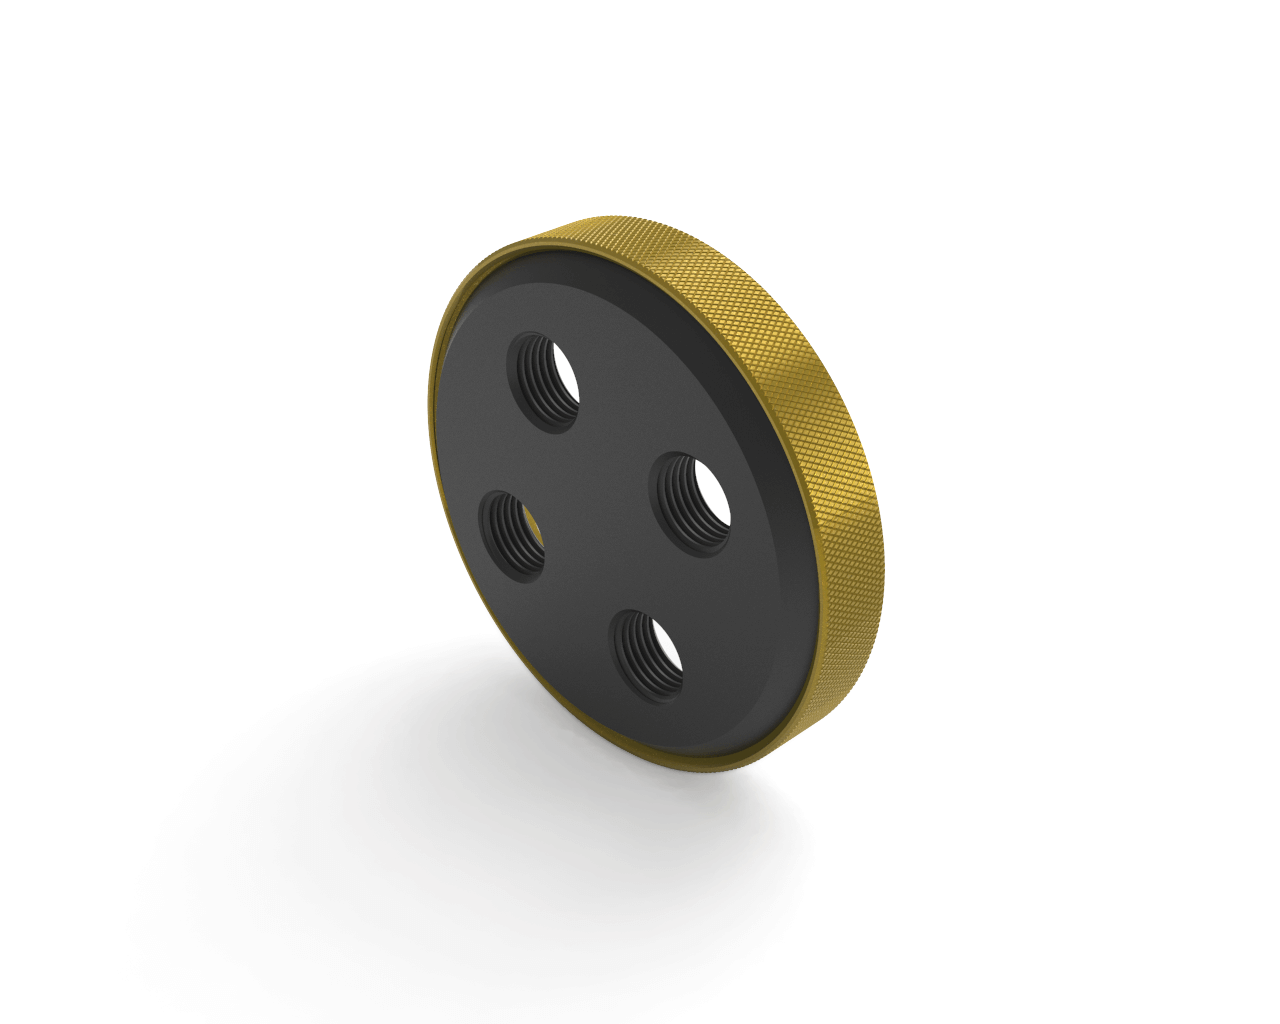 PrimoChill CTR Replacement SX Compression Ring - PrimoChill - KEEPING IT COOL Gold